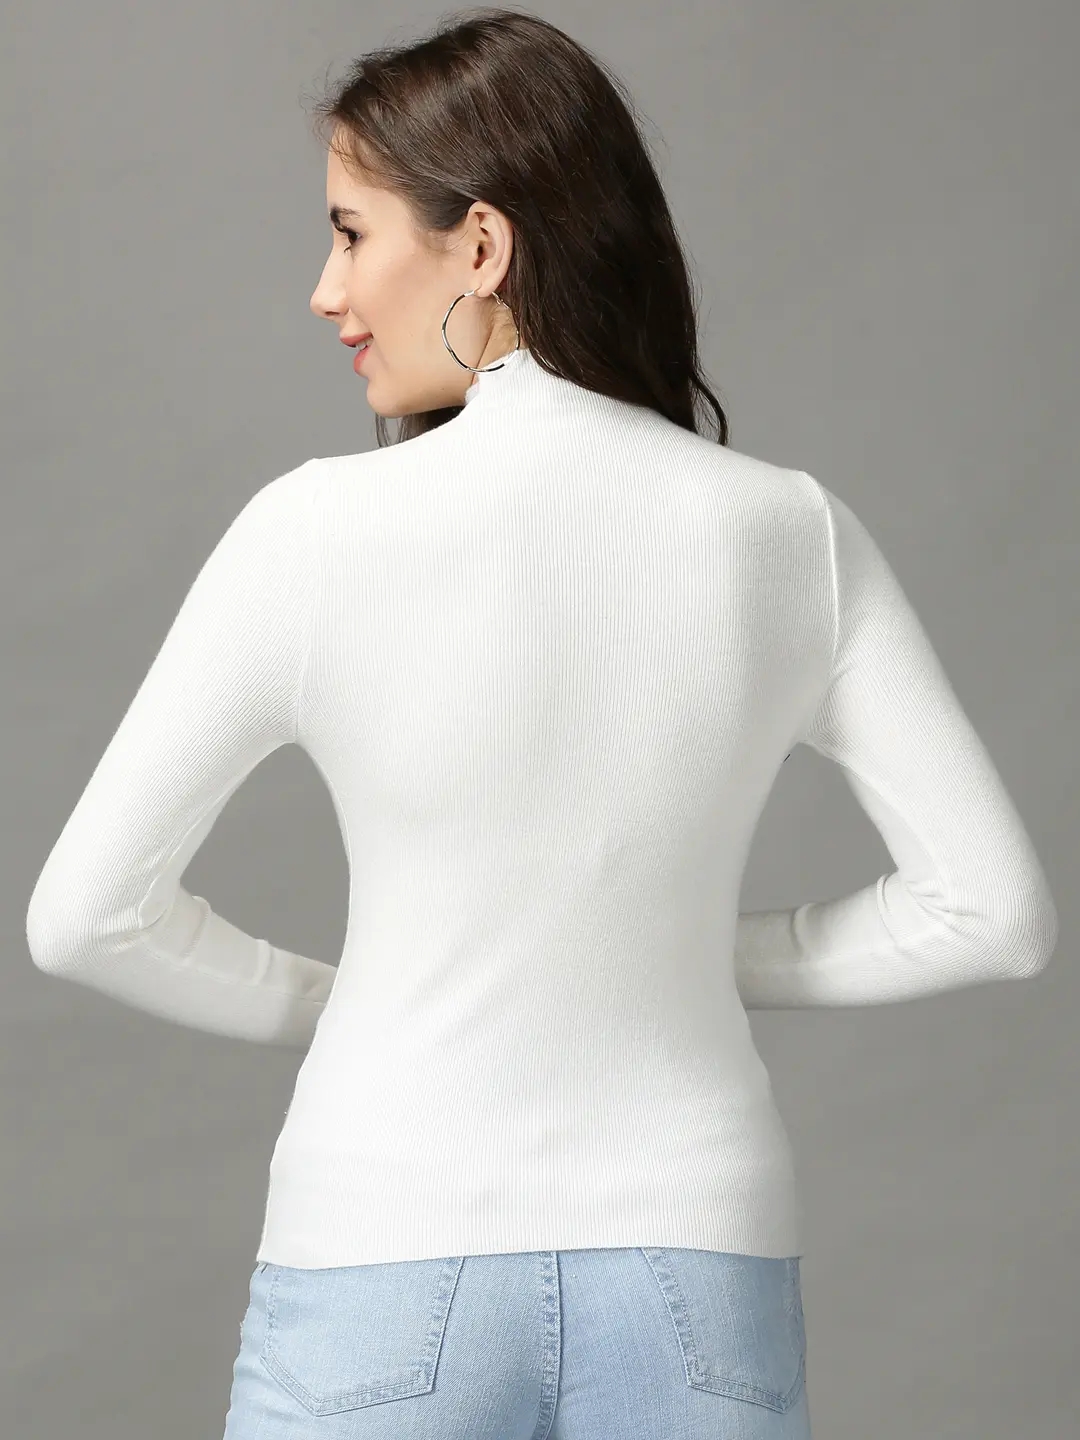 SHOWOFF Women's High Neck Fitted Embellished White Regular Top